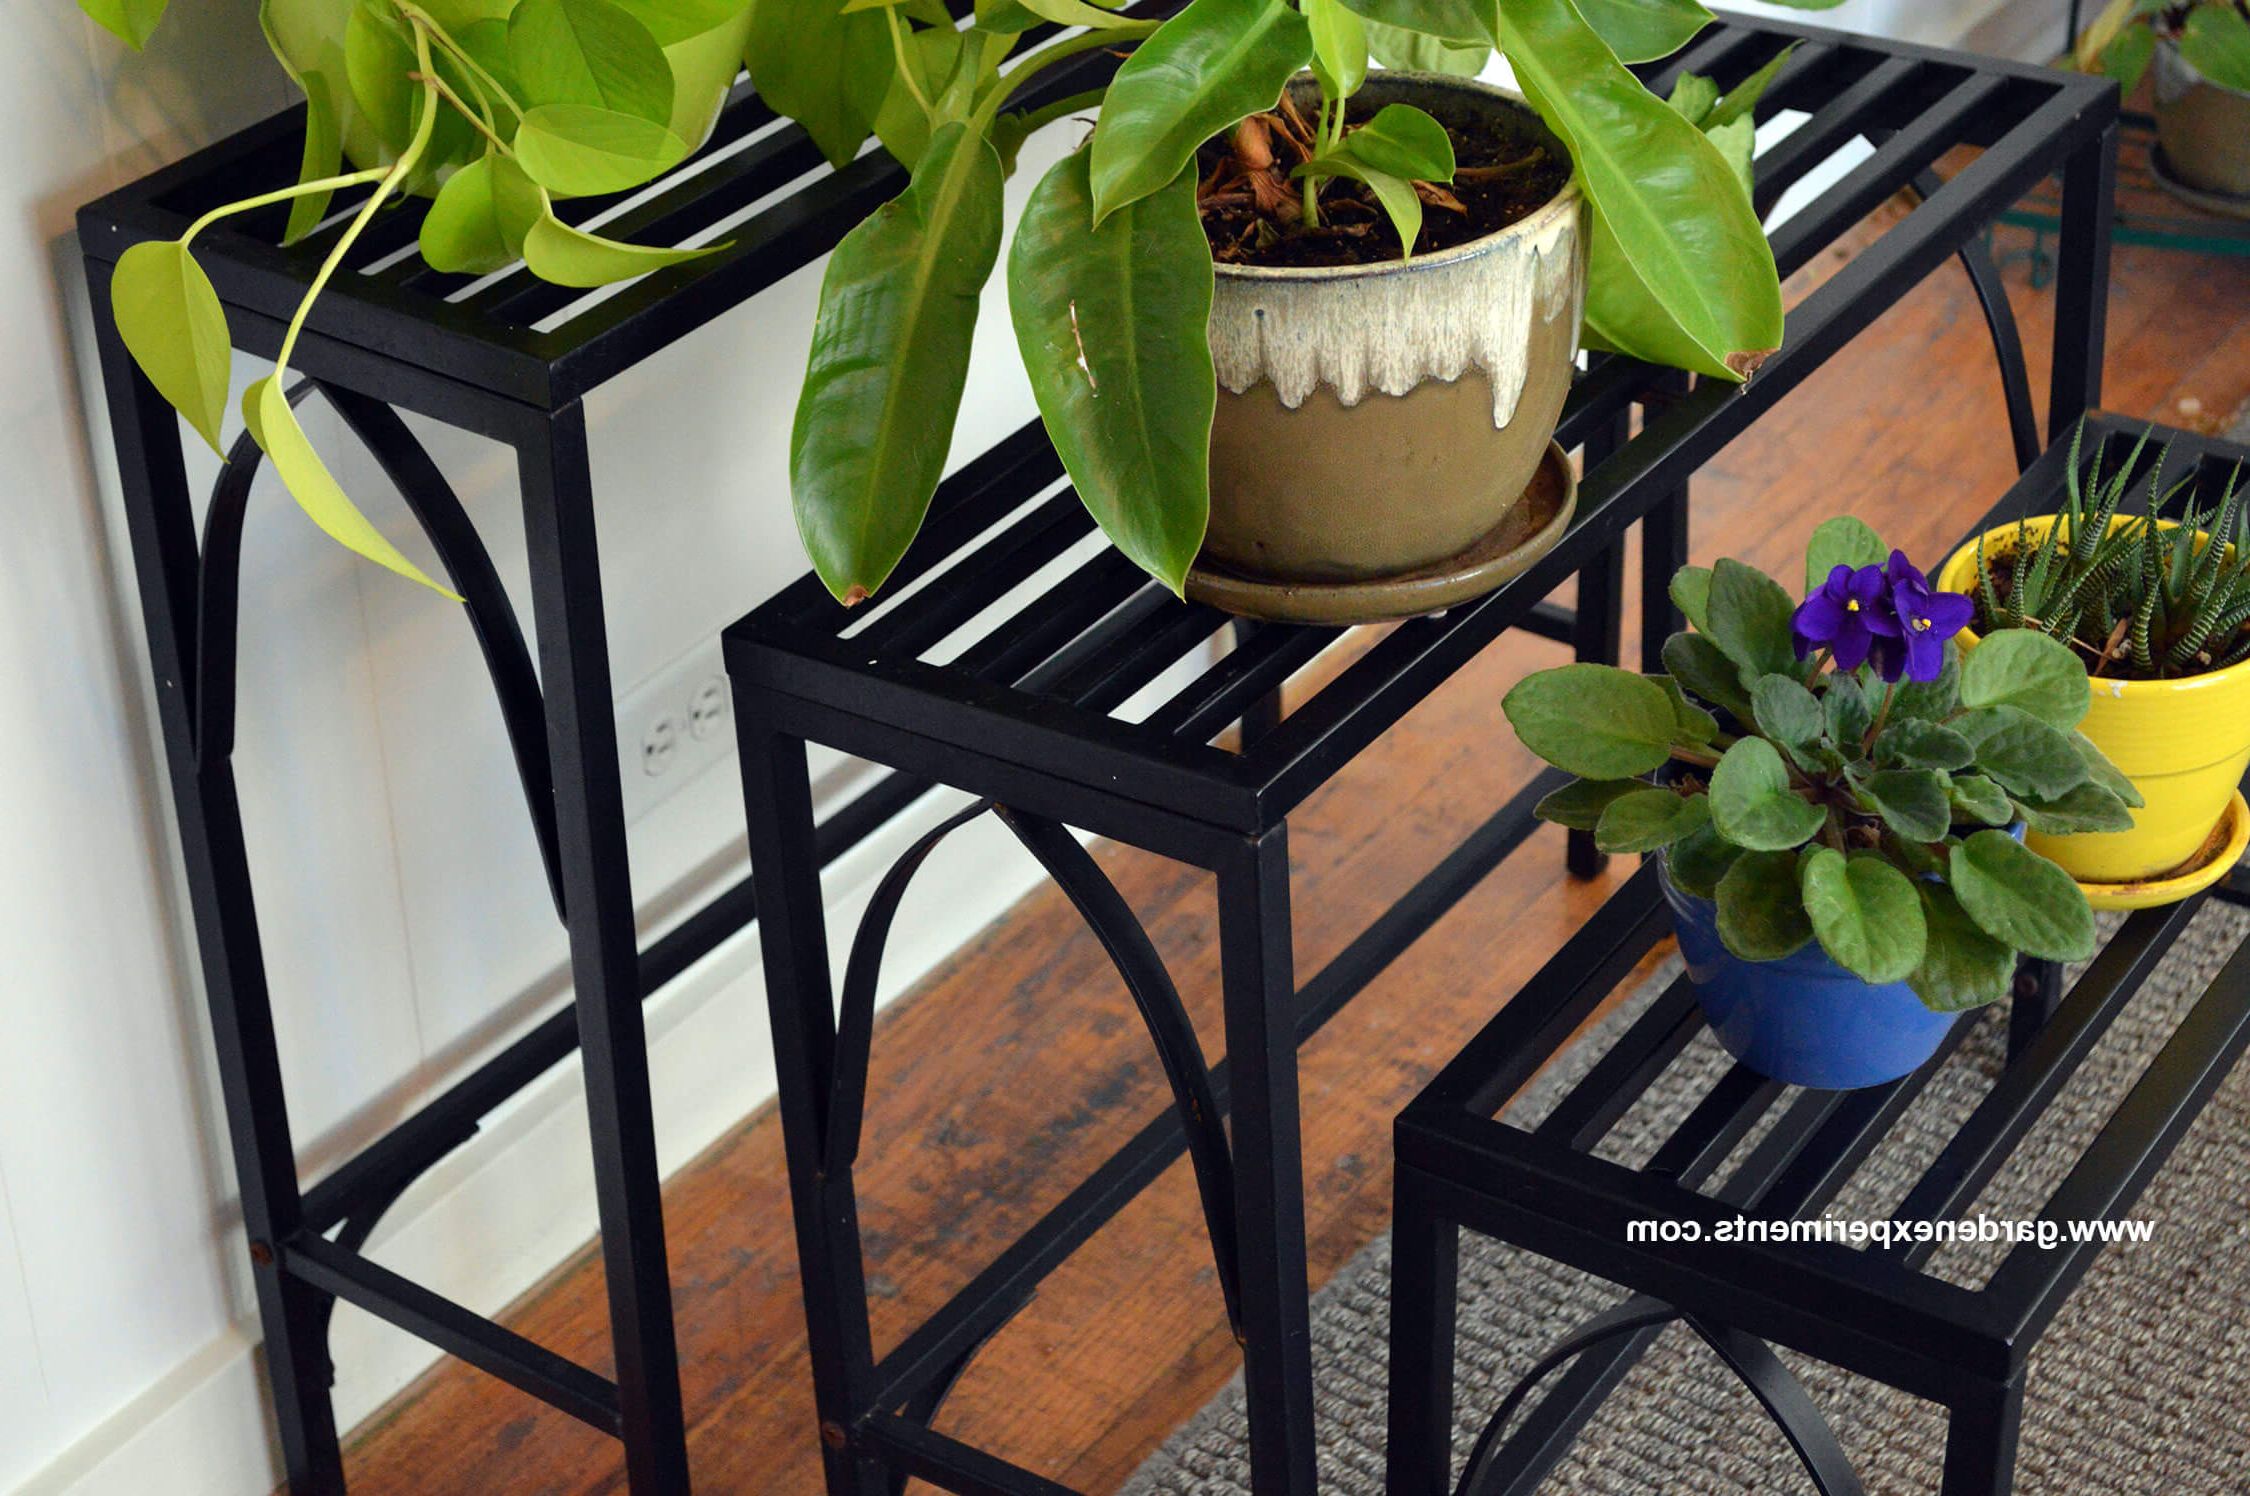 Metal Plant Stands Intended For Most Popular Sturdy Metal Plant Stand Holds 12 Plants (View 7 of 10)